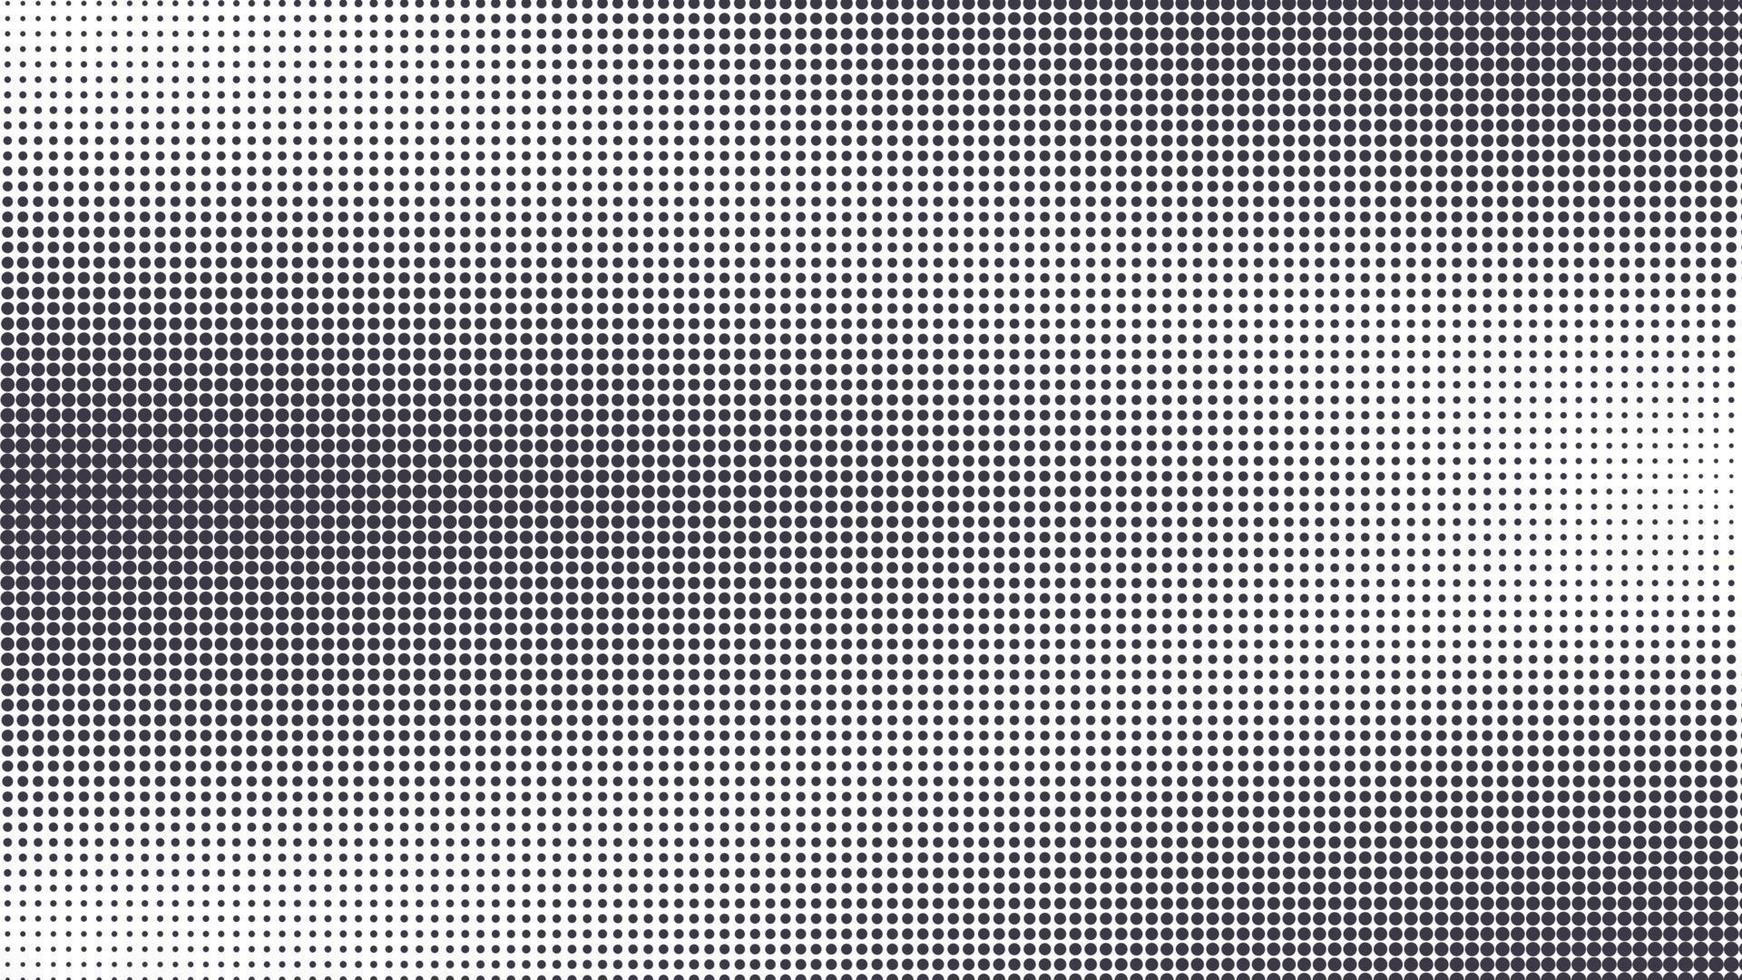 Vector abstract halftone background with grey dots